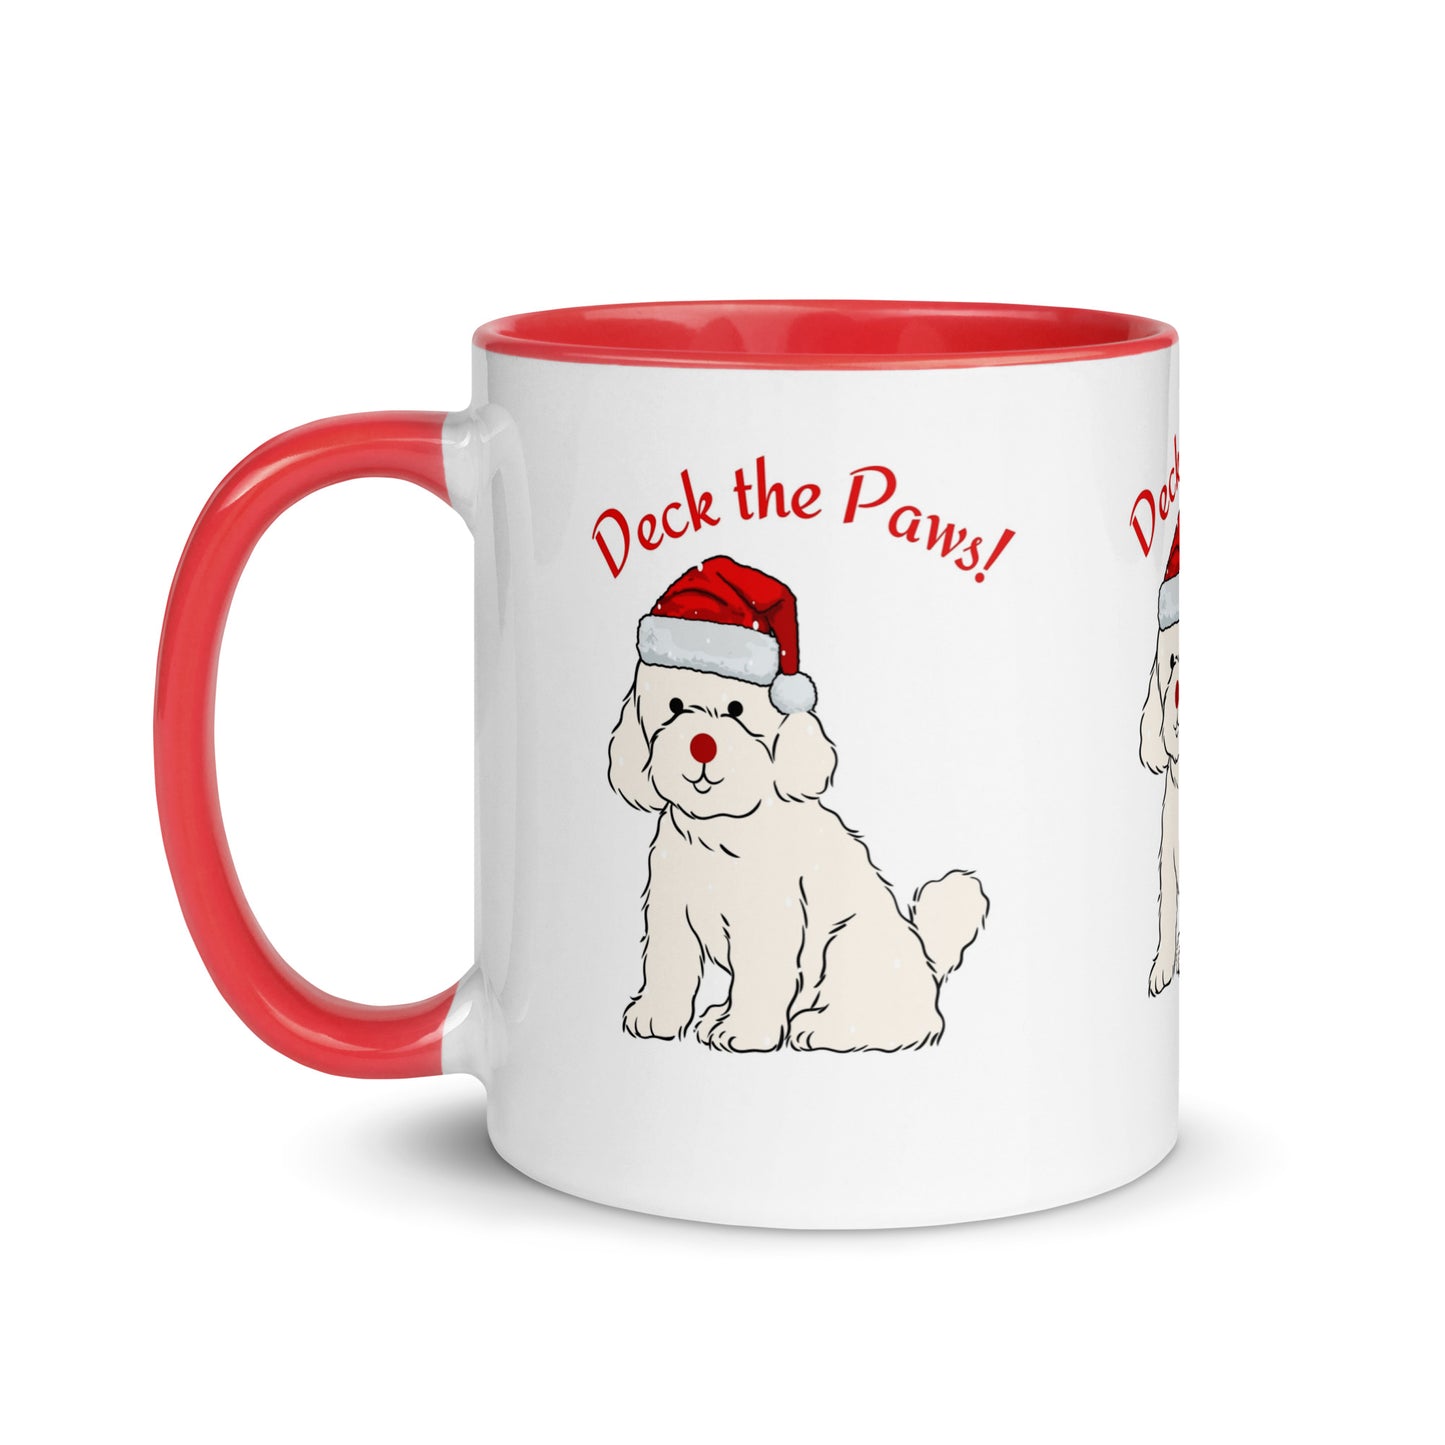 Unique Christmas Mug Gift: Heartwarming 'Deck the Paws' Theme. Unwrap the charm of a unique Christmas mug gift with a heartwarming 'Deck the Paws' theme. Share the joy of the season with a thoughtful and inspiring gift, designed to warm hearts.